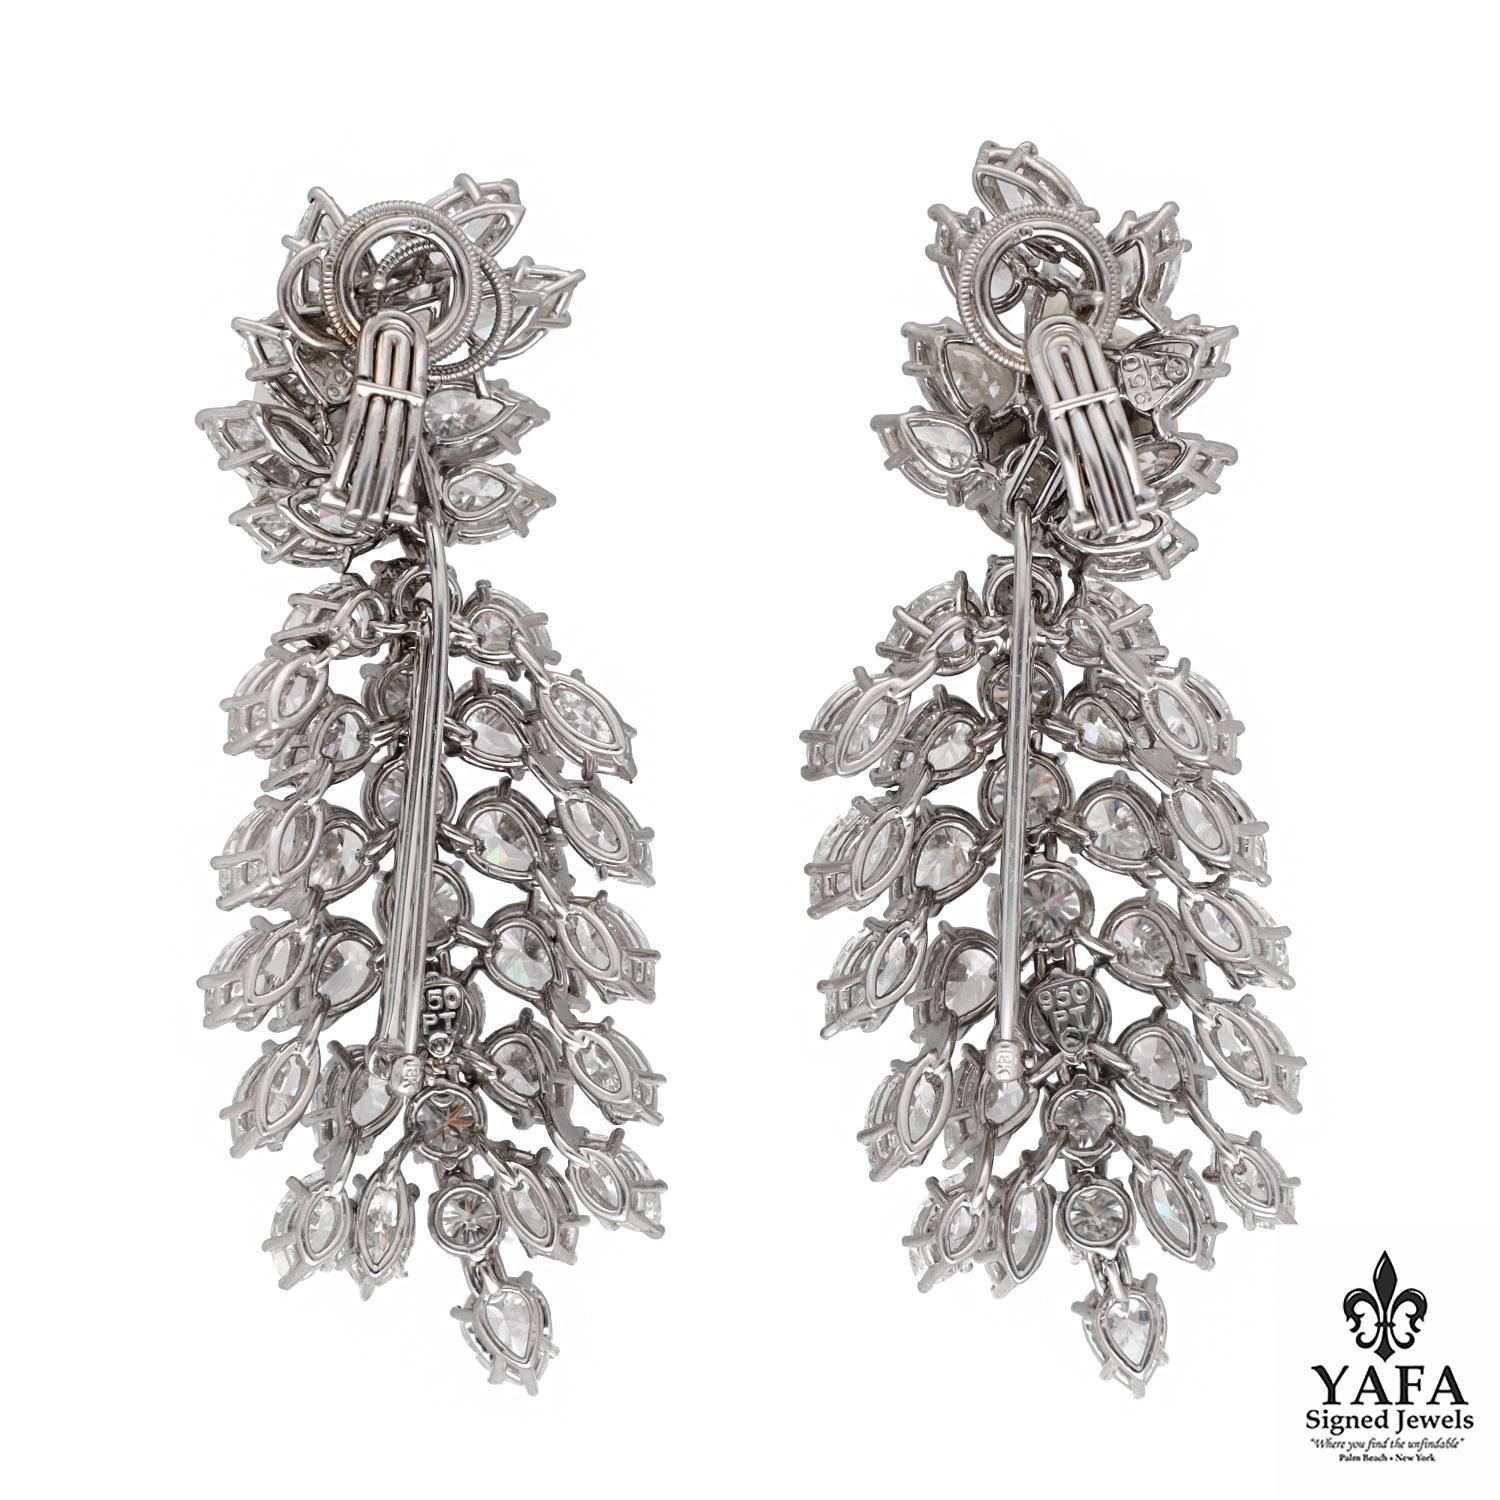 Harry Winston's craftsmanship and attention to detail stands out in these Diamond Cluster Earrings and detachable brooch. The cluster design features multiple shaped diamonds set closely together creating a sparkling and radiant effect.
Pendents are